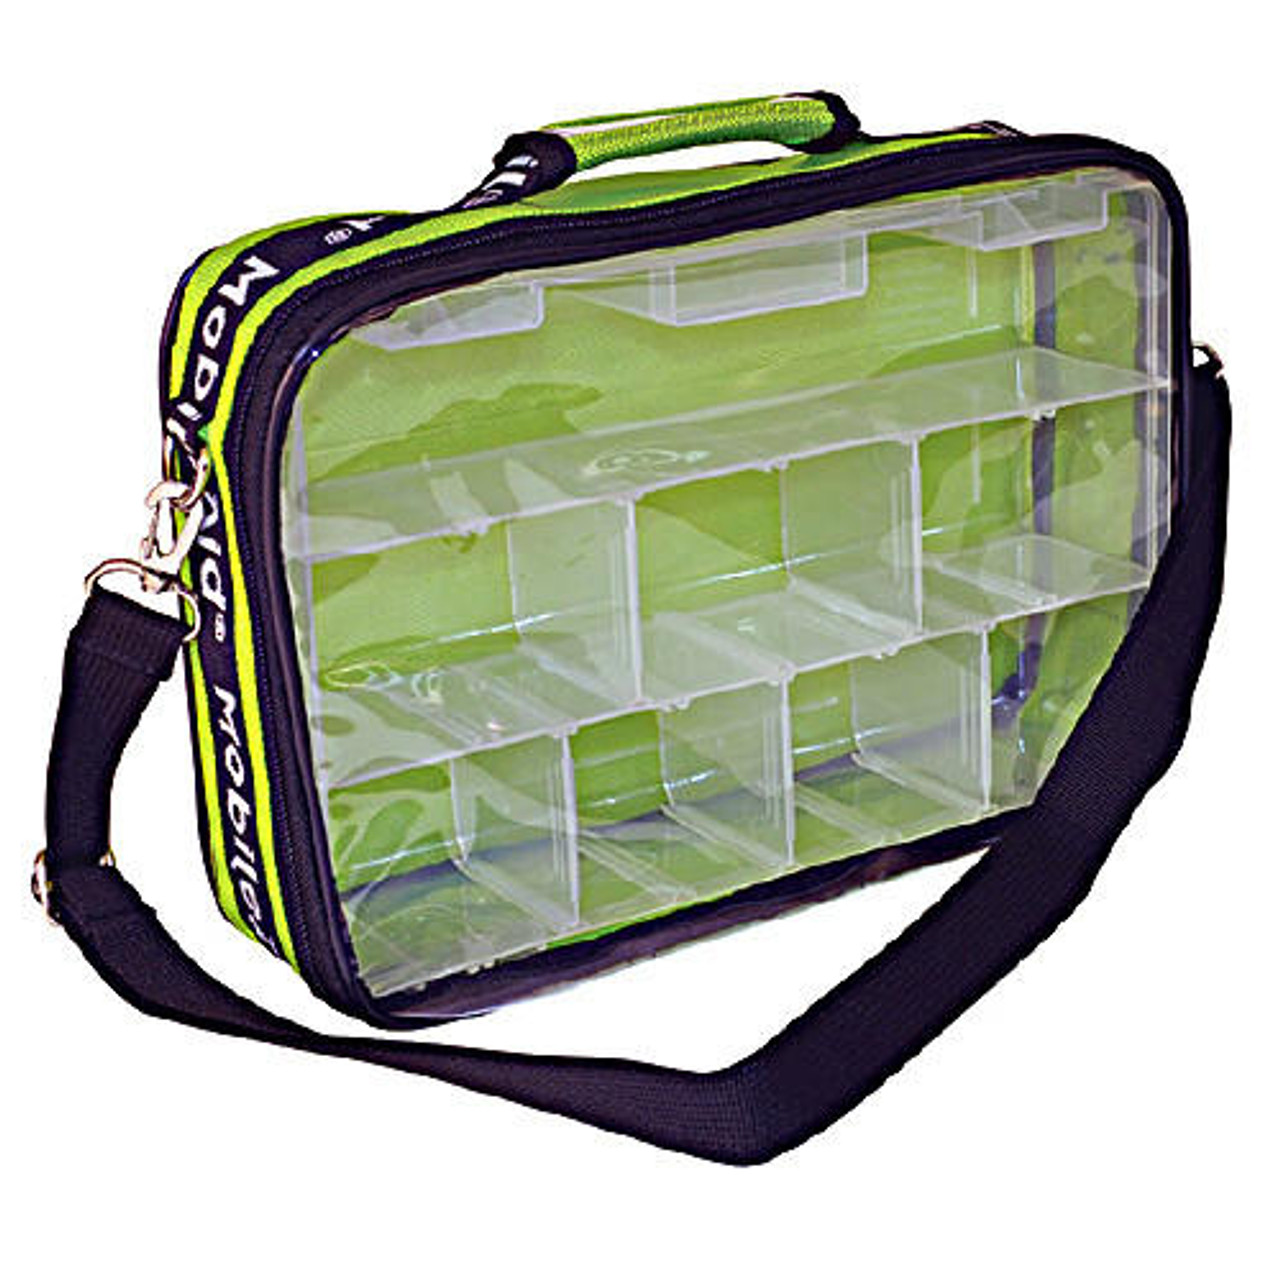 Buy OTS Emergency Supplies Clear View Pouch and Organizer Tray